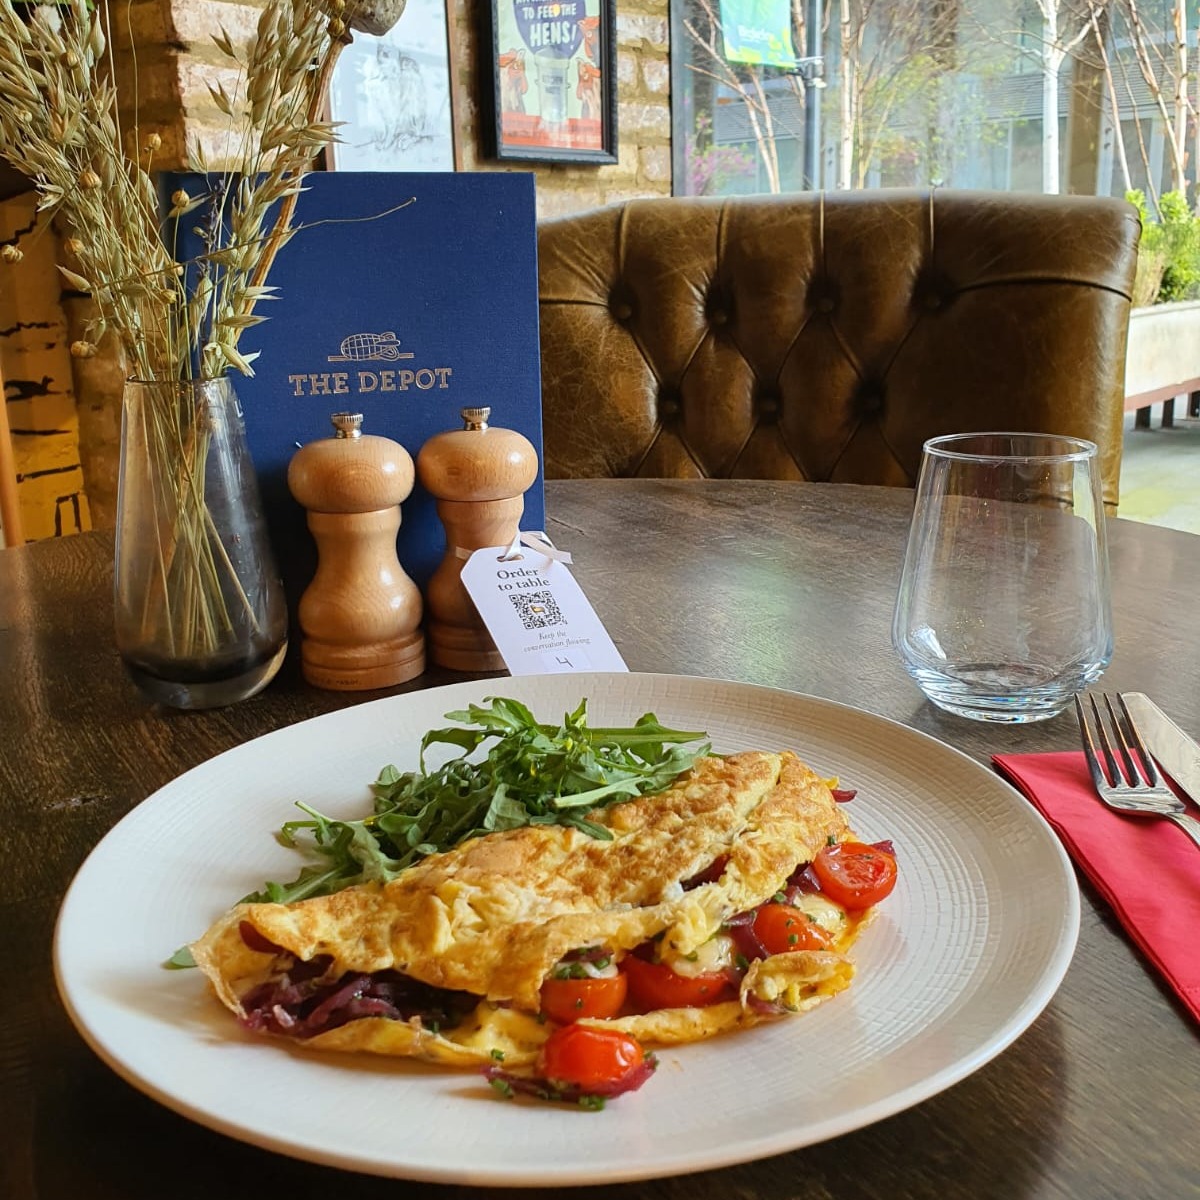 Rise and shine! 🌞 We're open from 10am every day to serve you a mouthwatering breakfast! 🍳

#se3 #kidbrooke #kidbrookevillage #breakfast @youngspubs